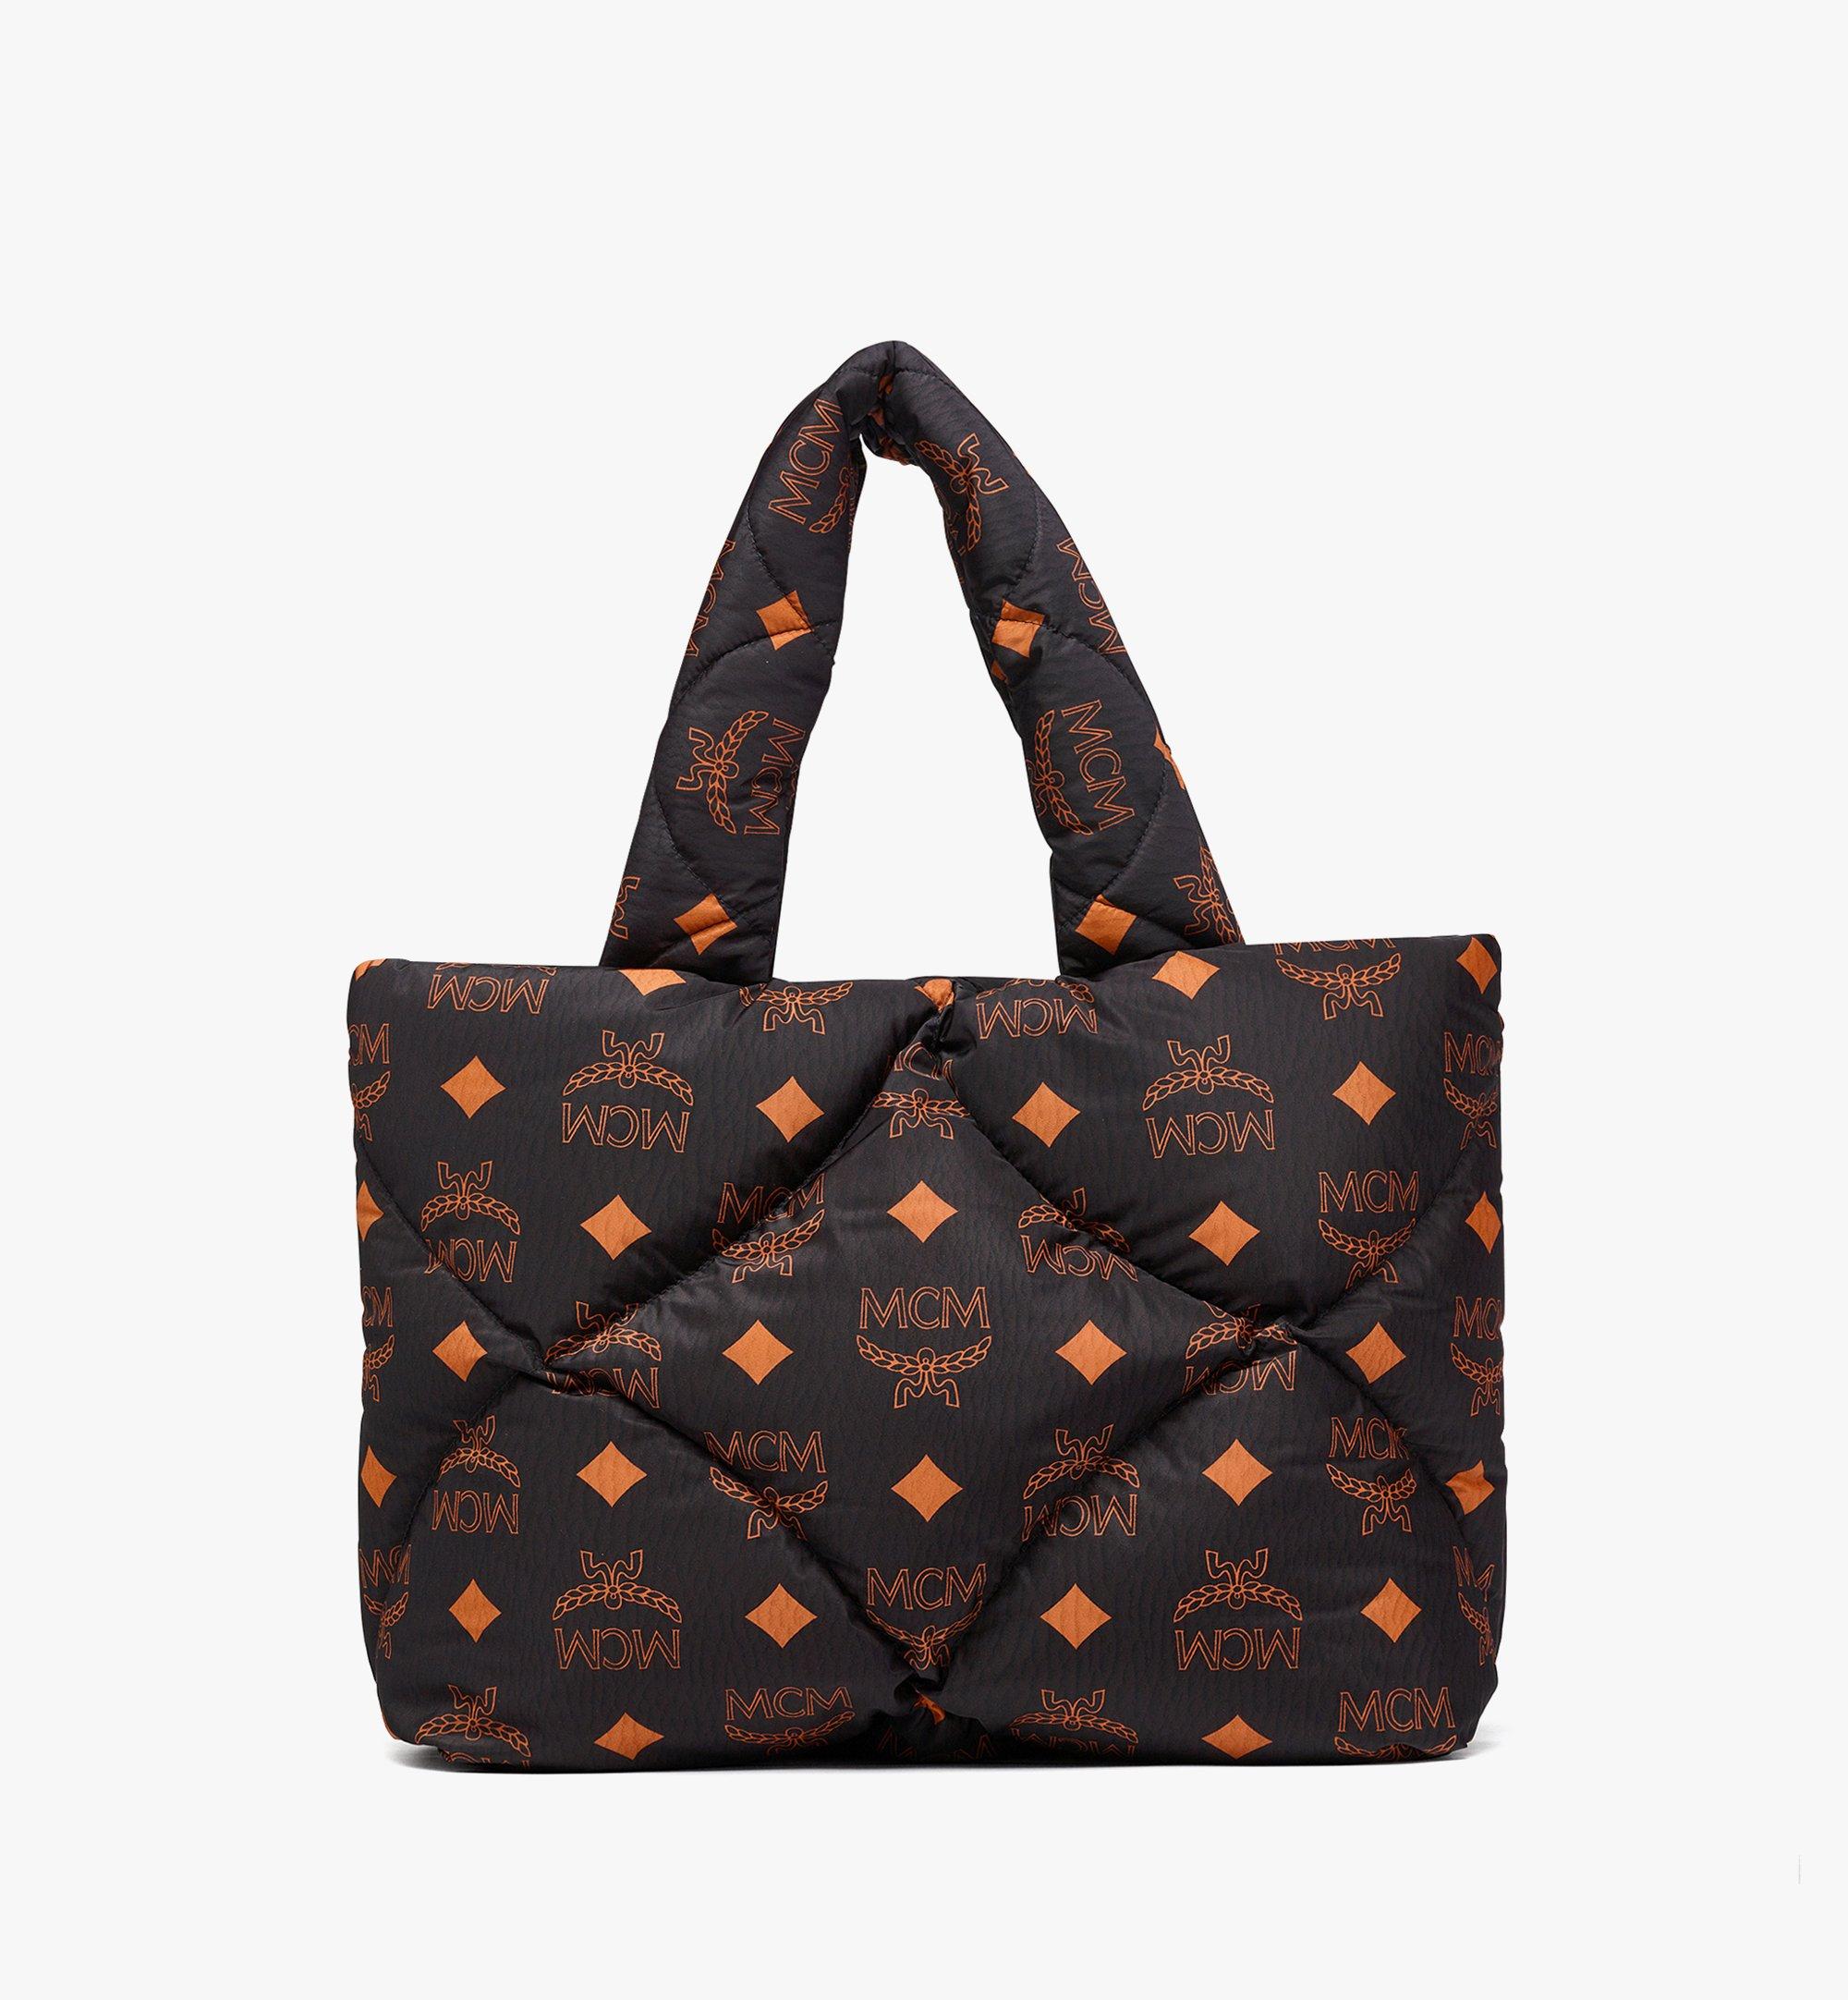 Mnchen Quilted Tote in Maxi Monogram Nylon